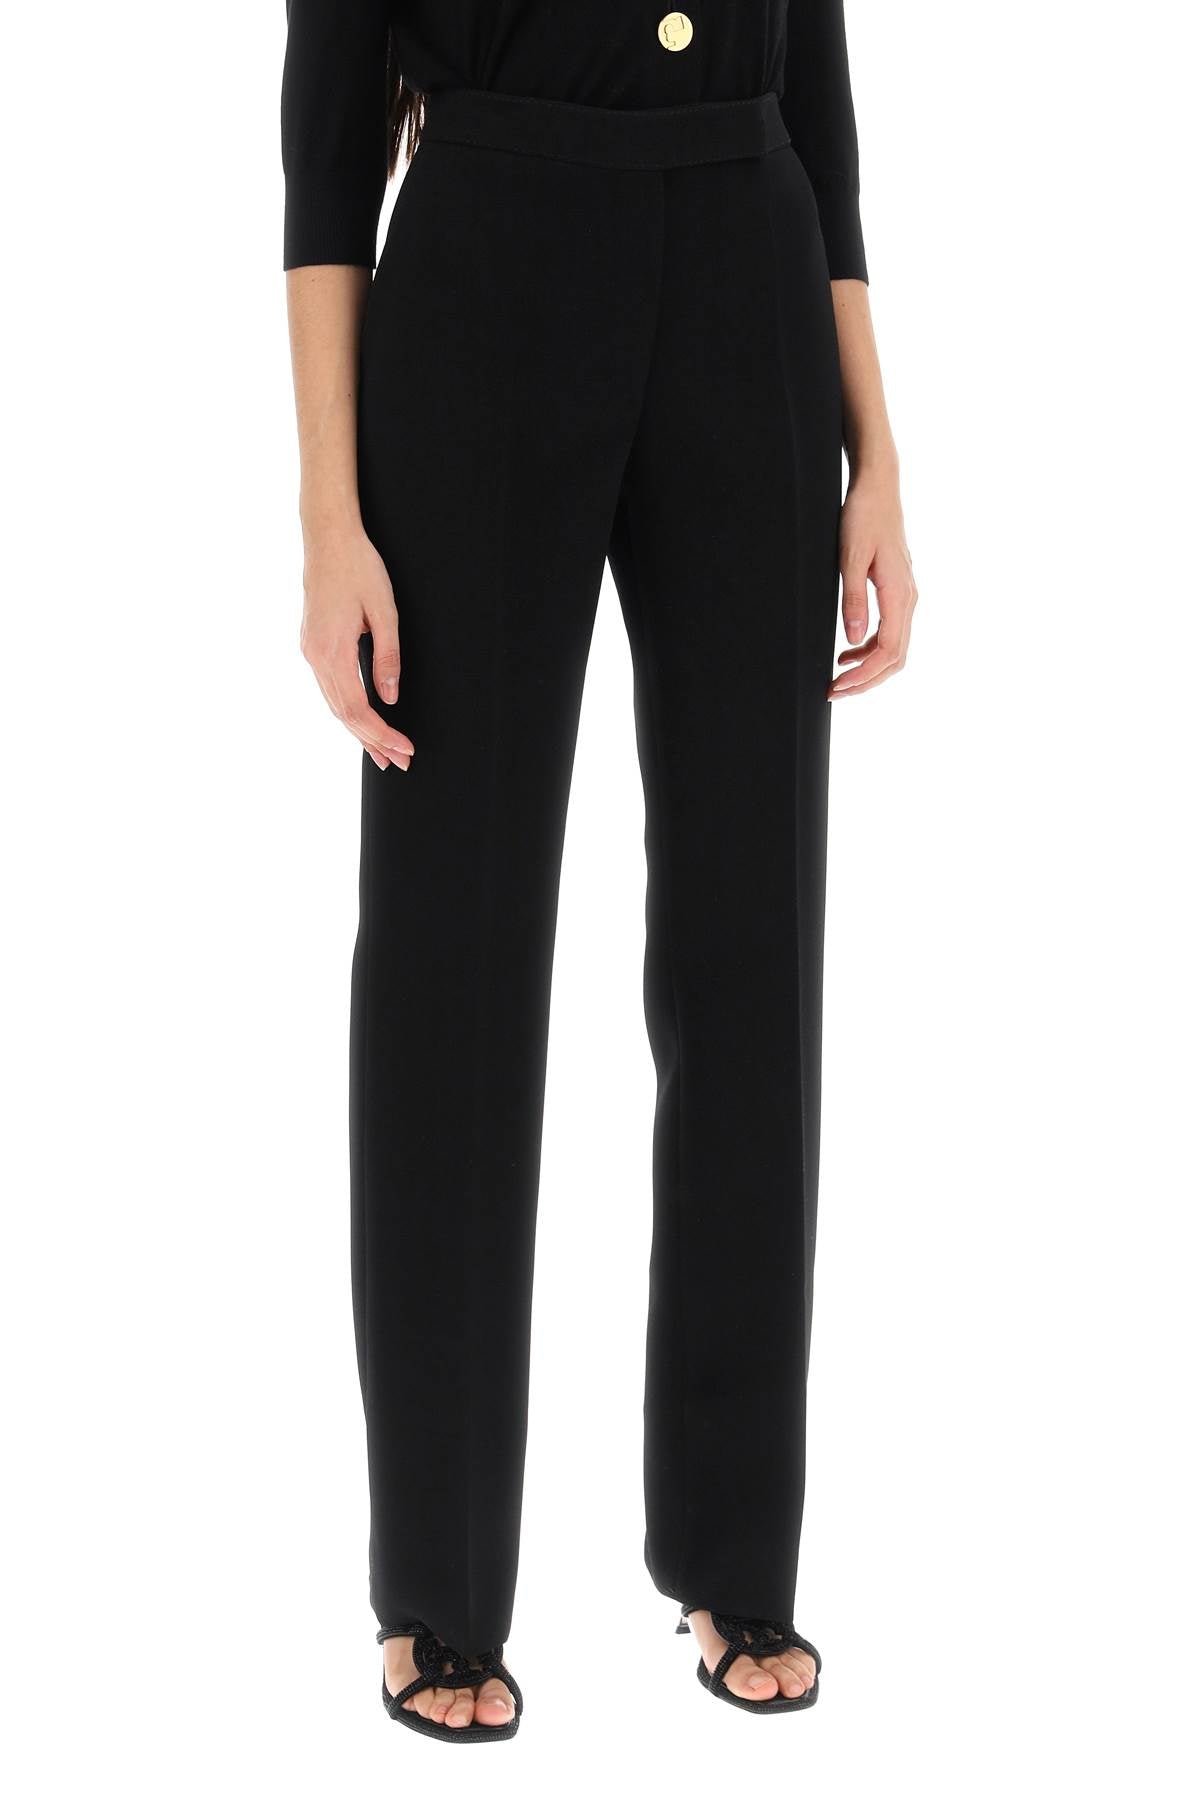 Tory burch straight leg pants in crepe cady-1